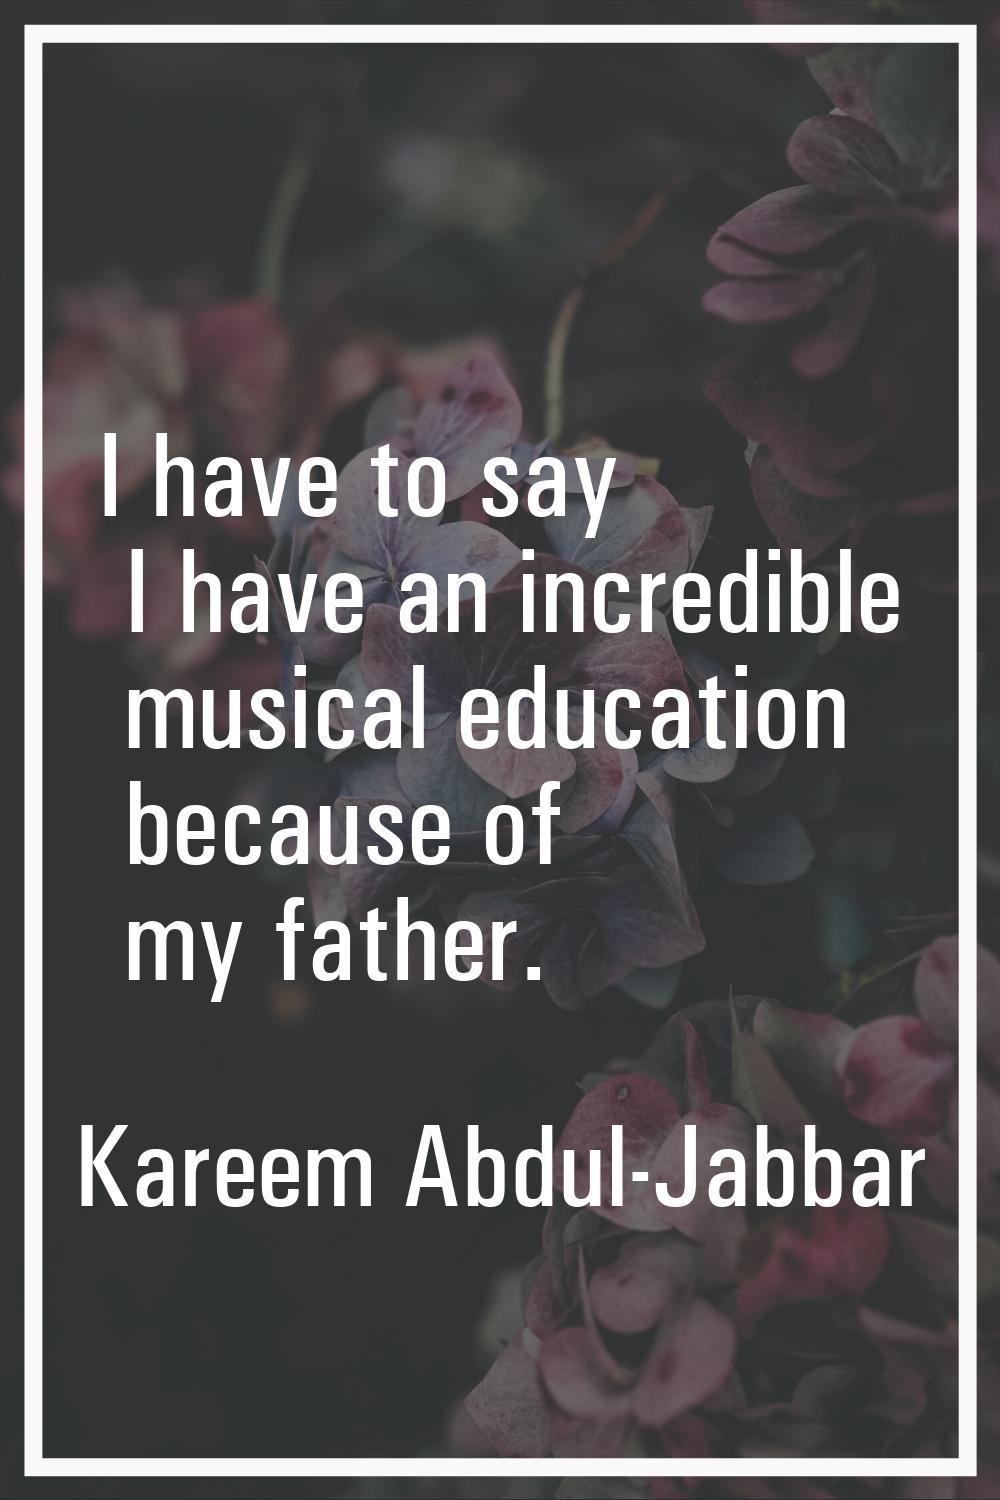 I have to say I have an incredible musical education because of my father.